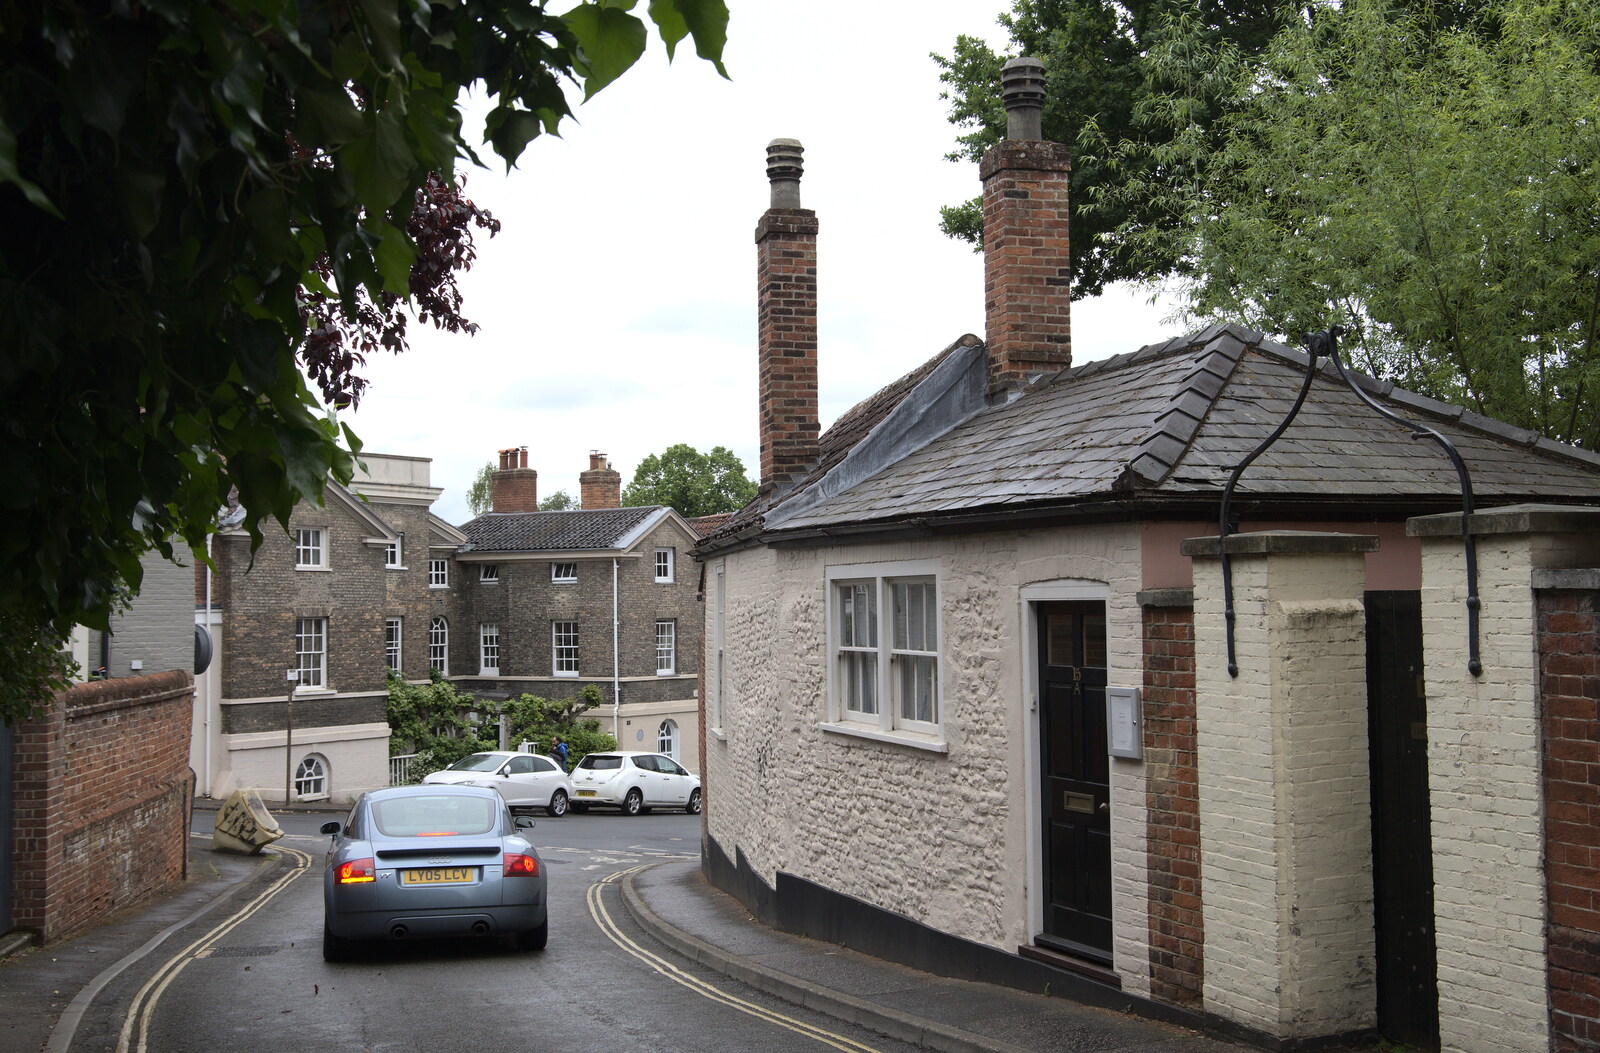 A quaint little house on the end of Willow Lane from Discovering the Hidden City: Norwich, Norfolk - 23rd May 2022